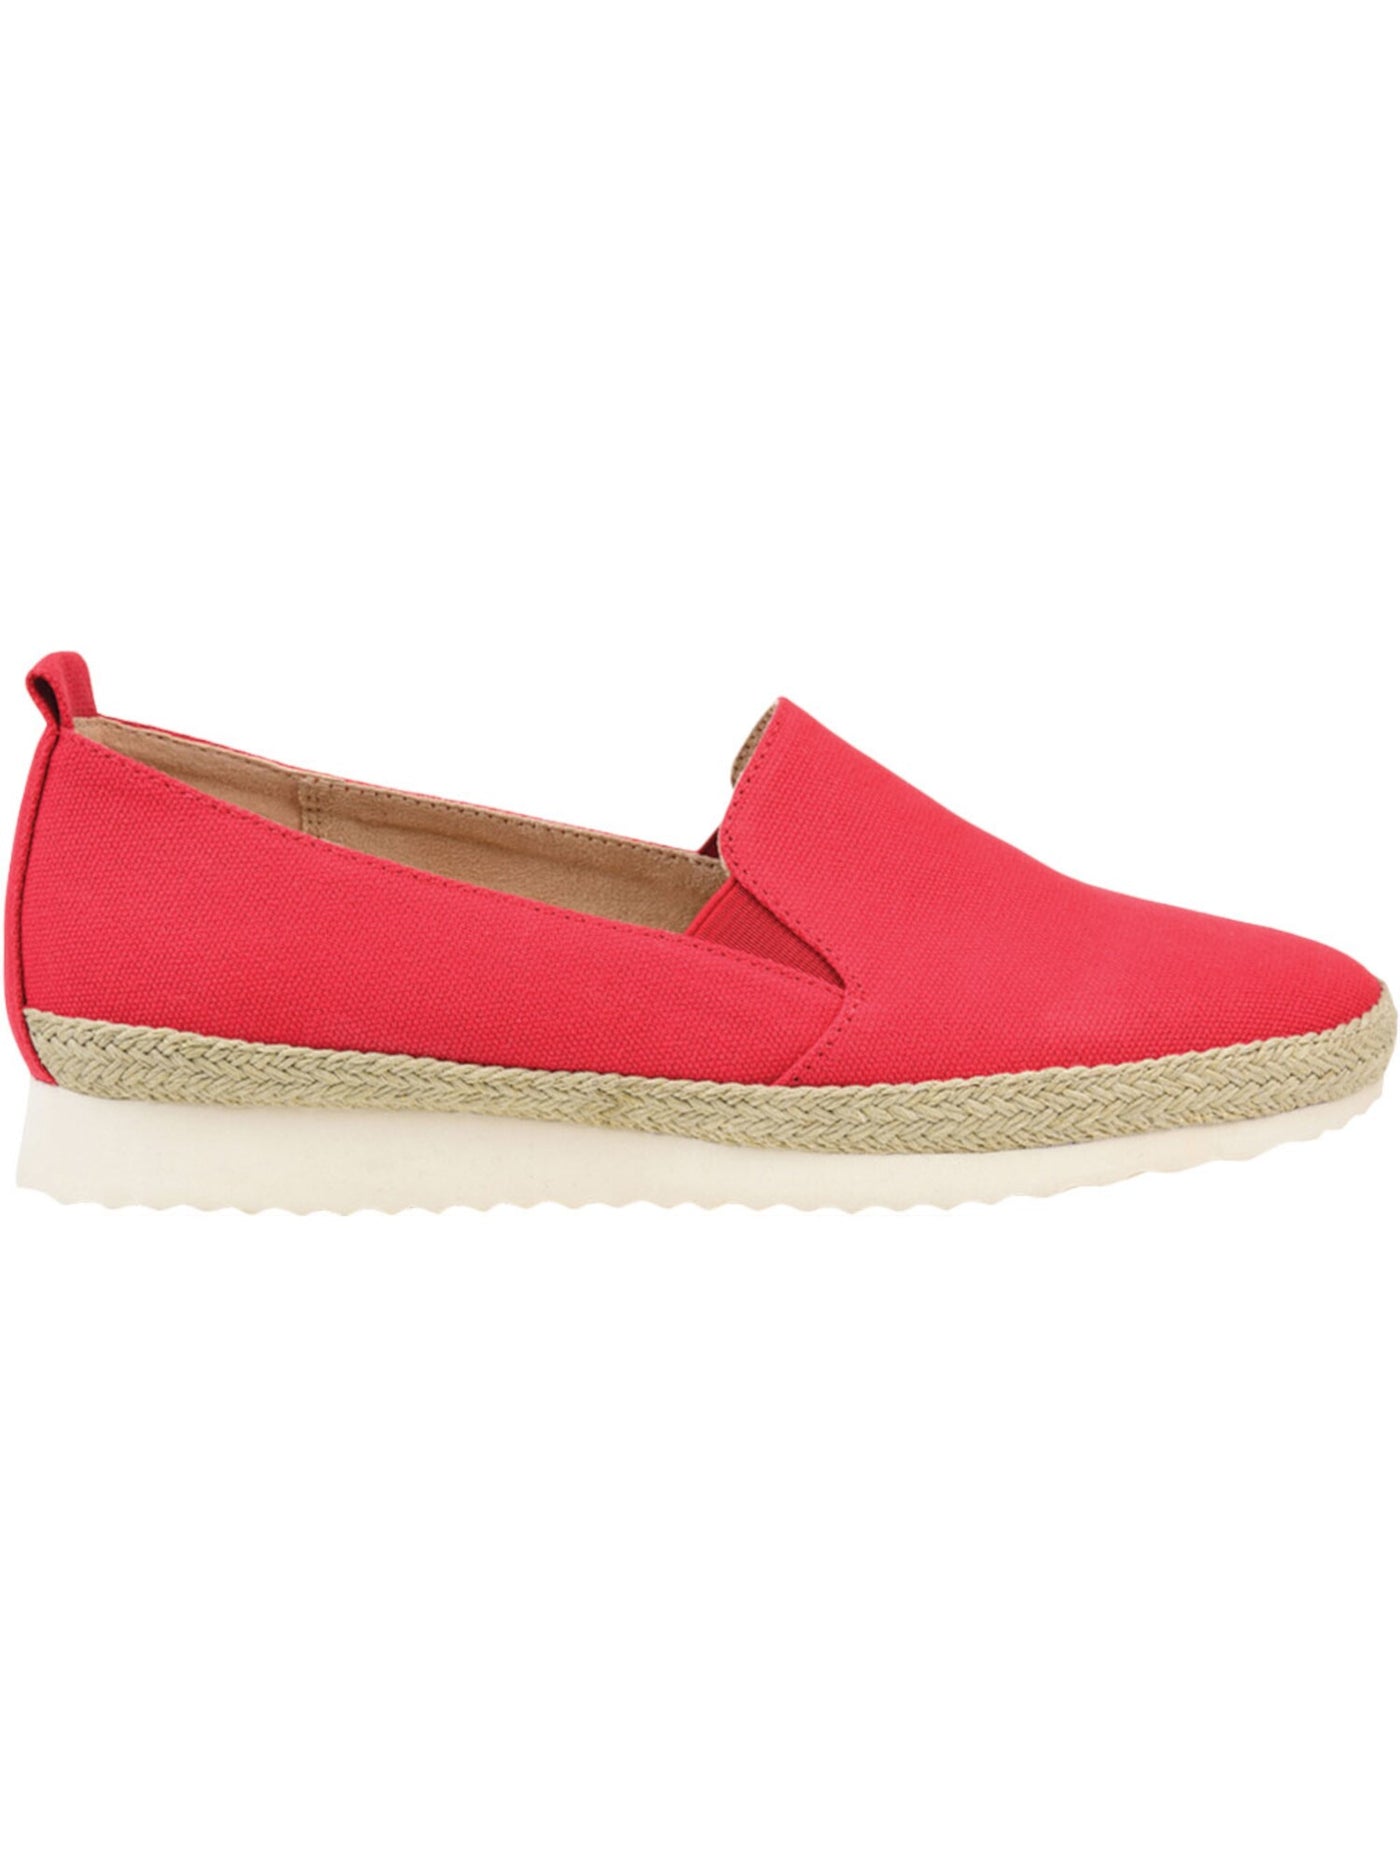 JOURNEE COLLECTION Womens Red Twin Side Gore Back Pull Tab Comfort Leela Round Toe Wedge Slip On Espadrille Shoes 5.5